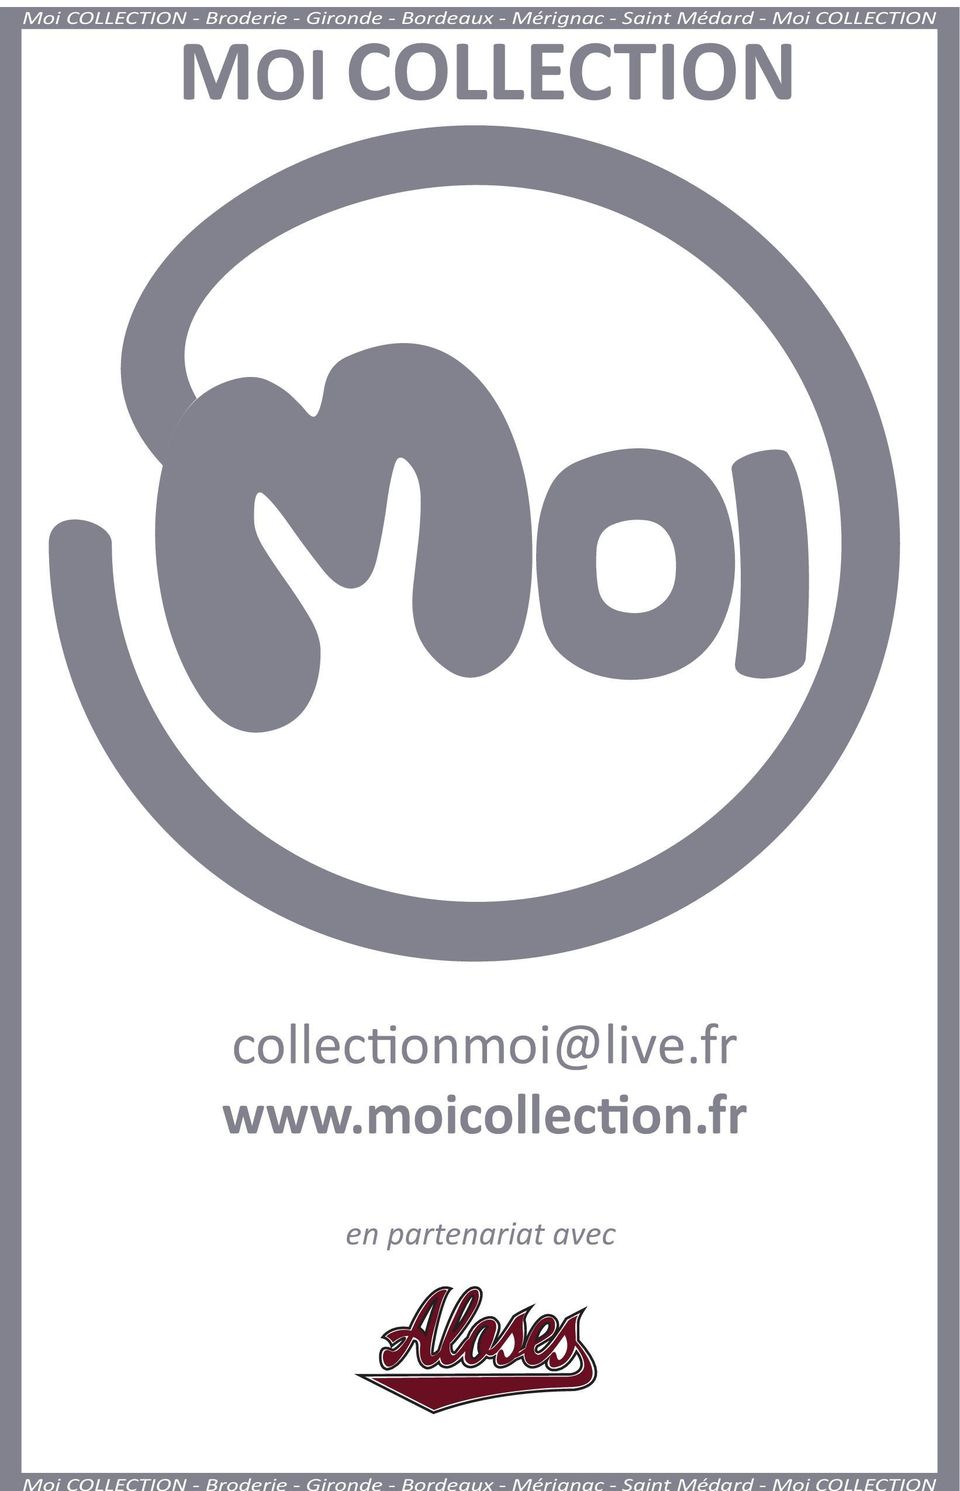 fr www.moicollection.